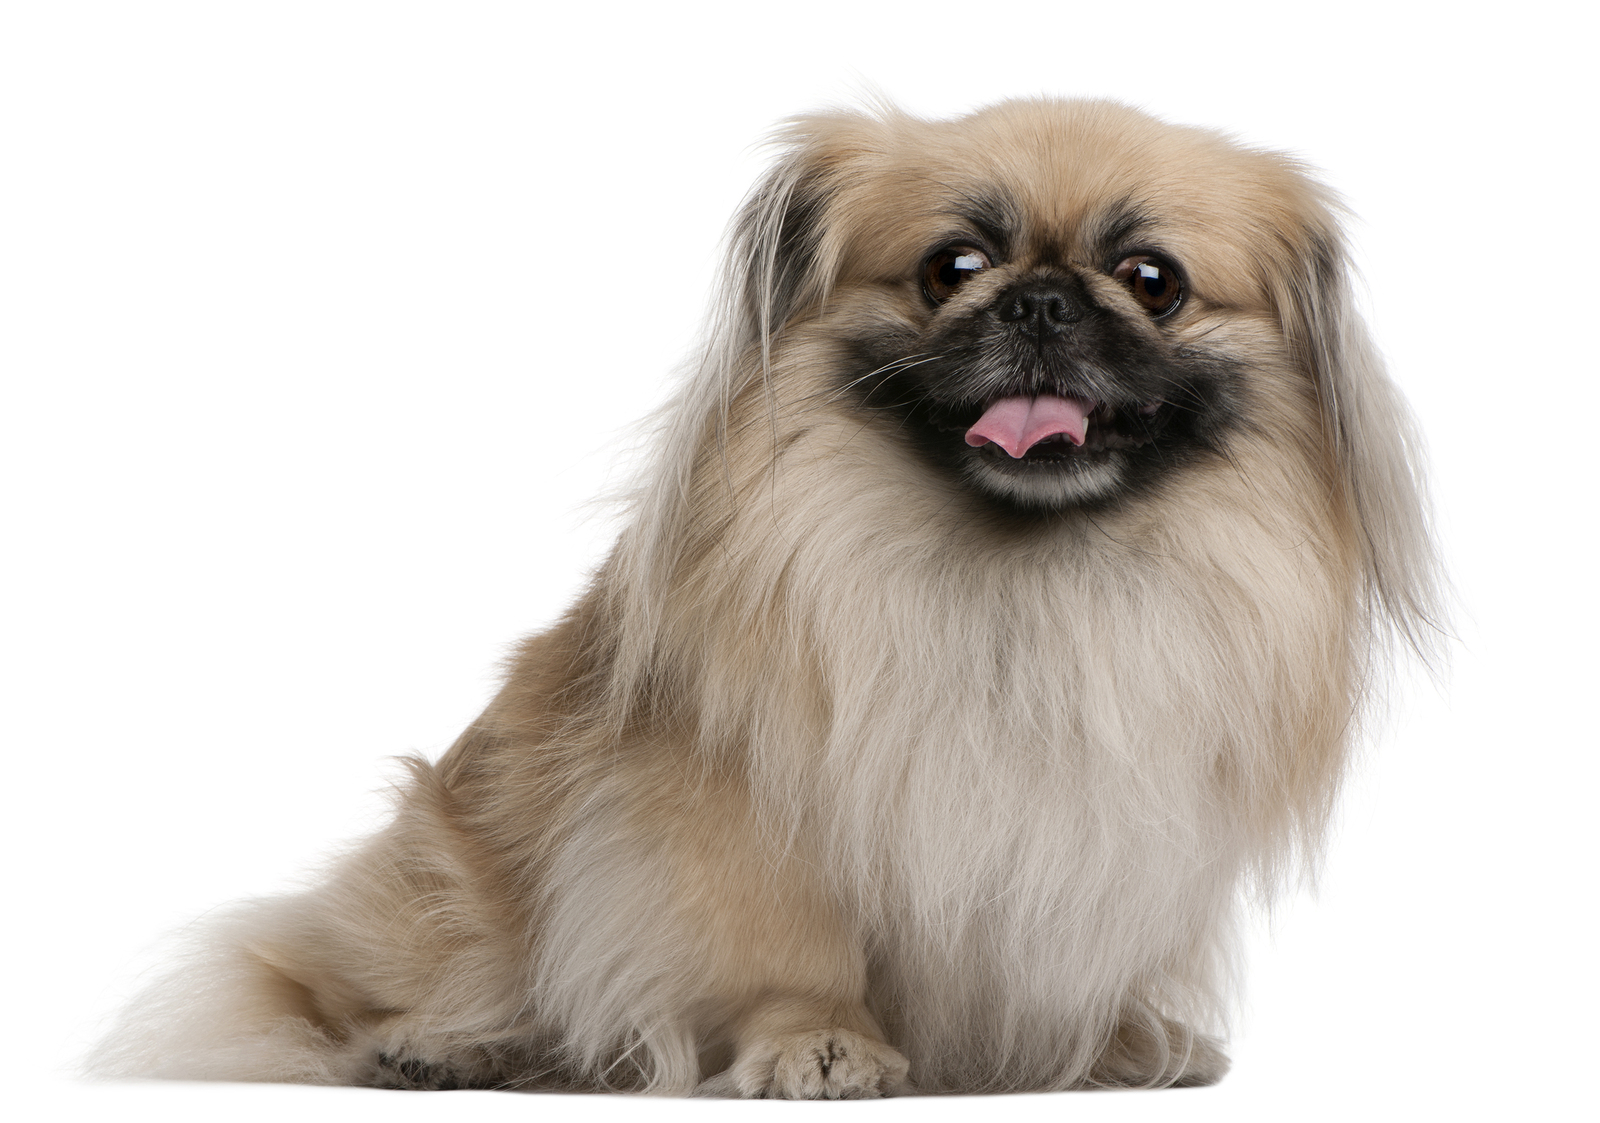 Pekingese Dogs Facts And Information  